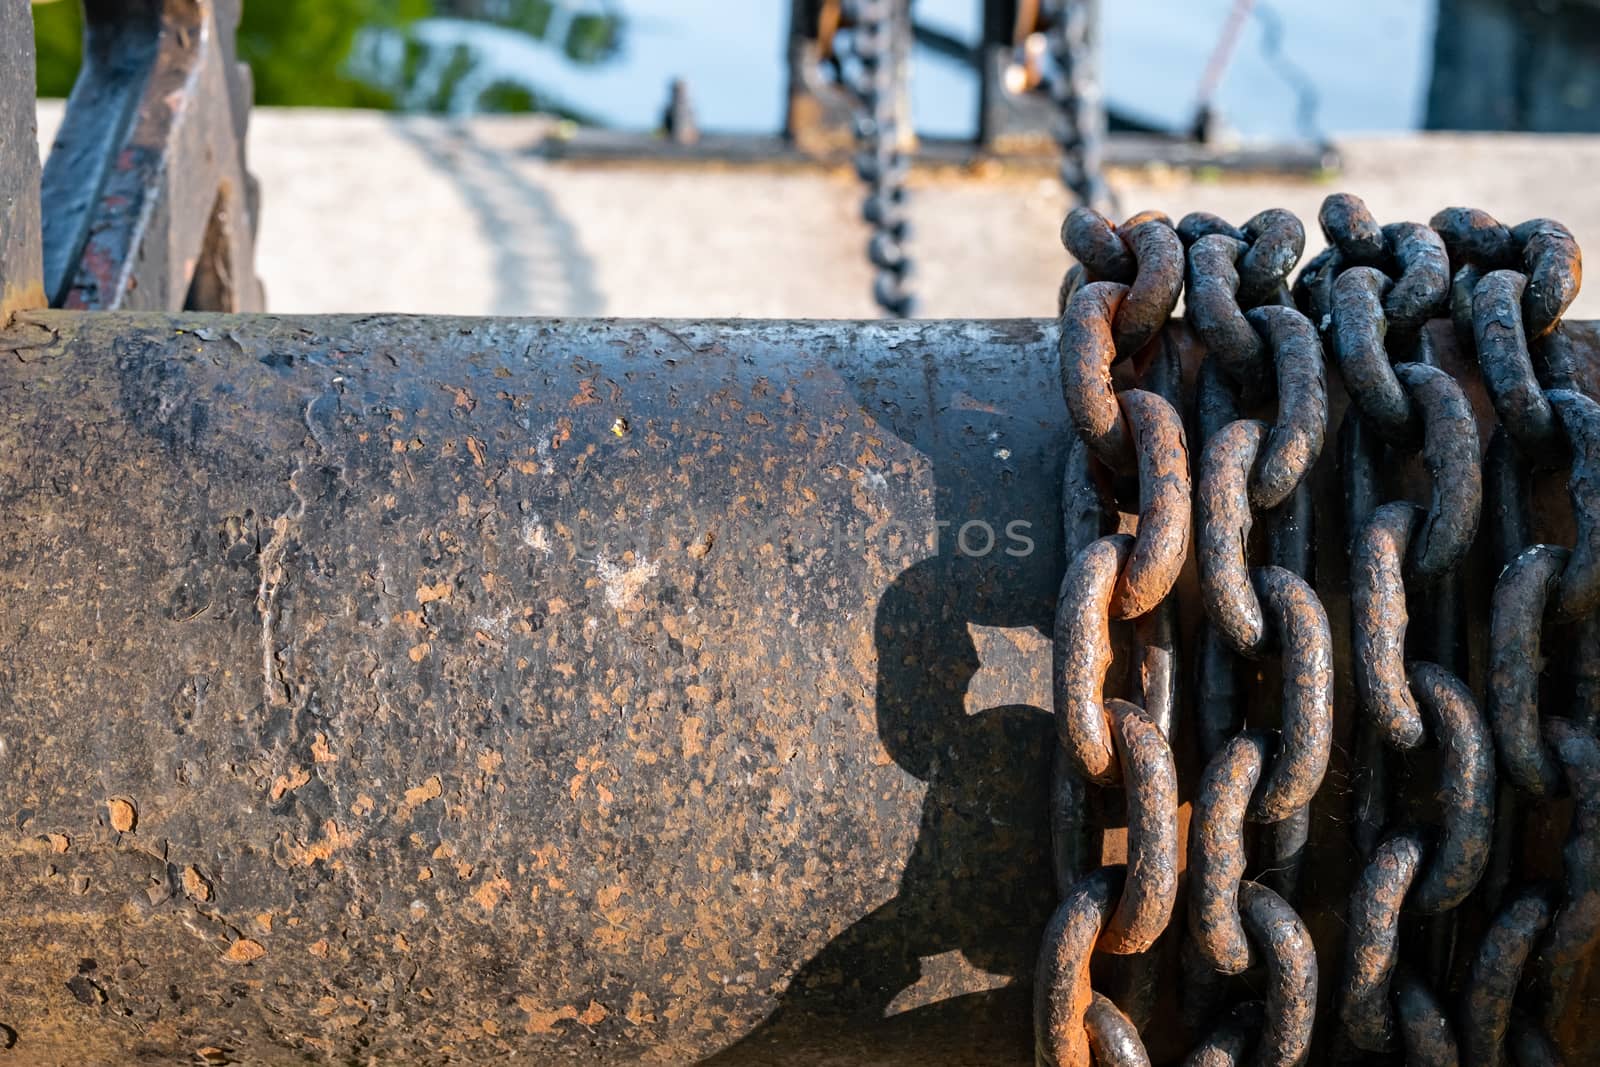 Rusting iron chains are wrapped around a large metal spool, visibly continuing suspended in the background.